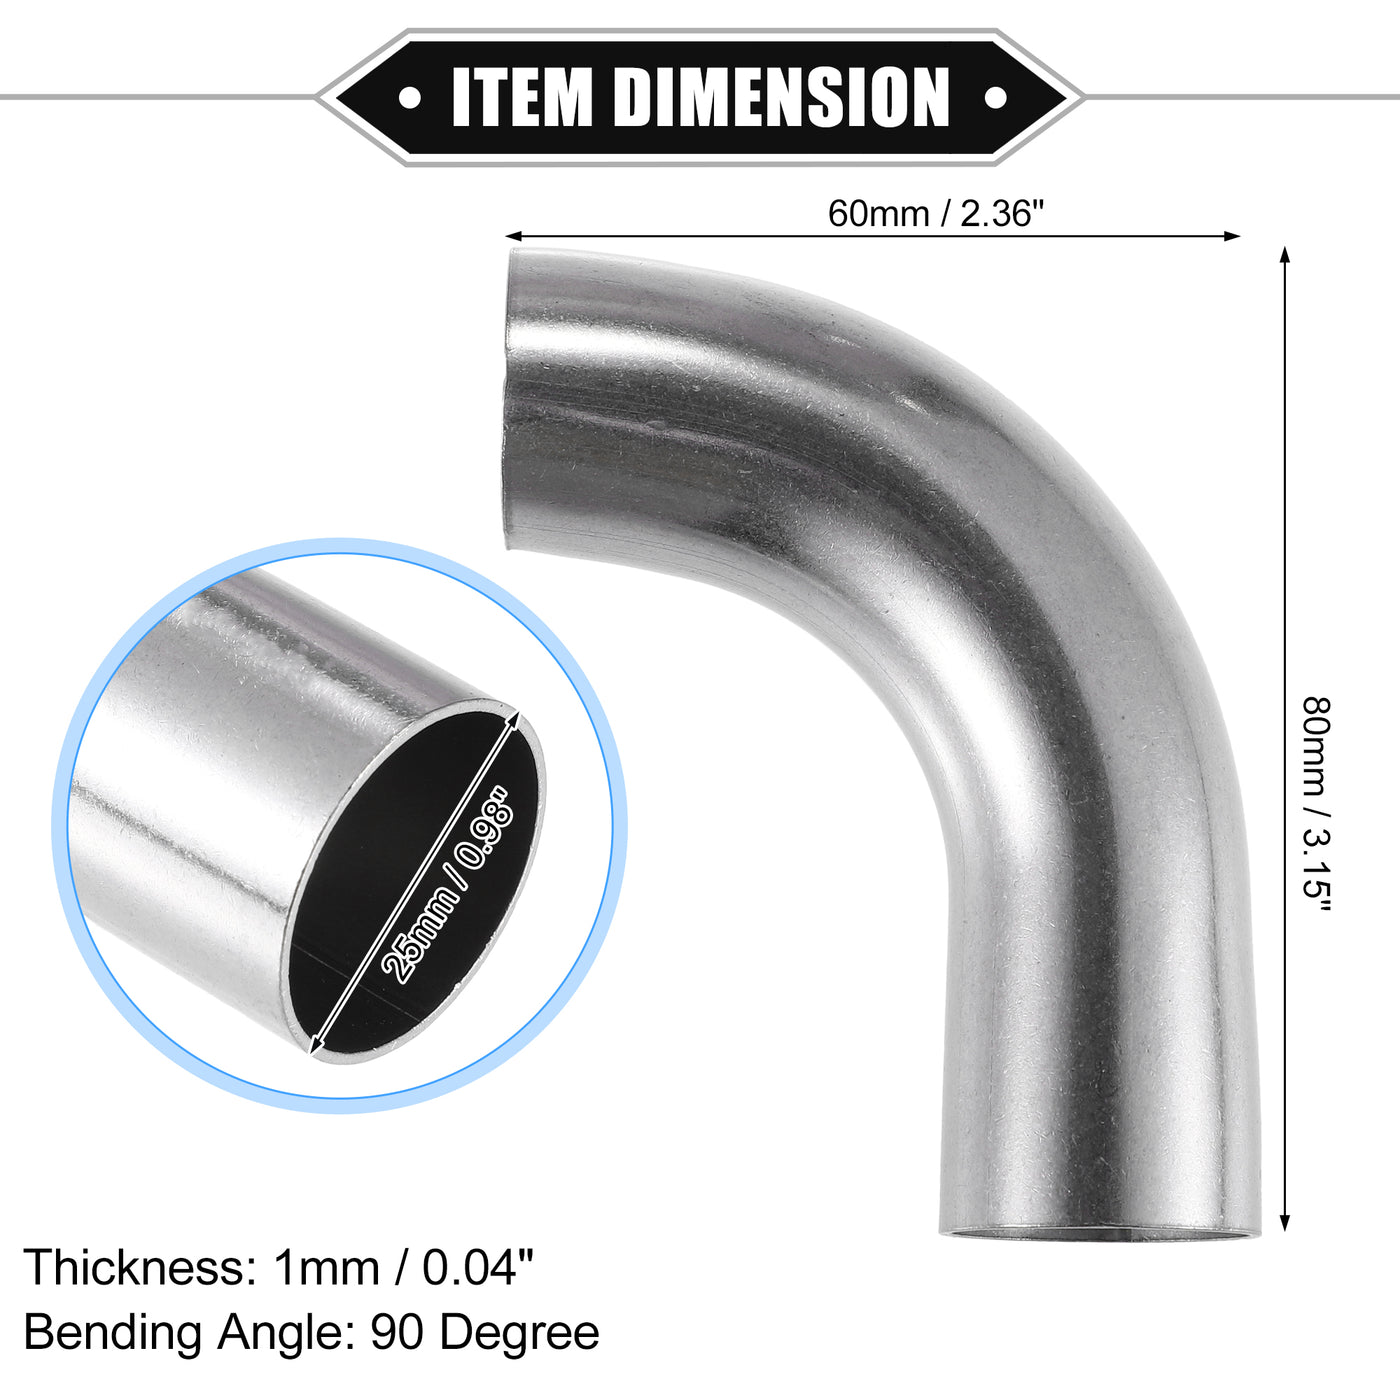 VekAuto 2 Pcs Bend Elbow Pipe Tube, 1" OD 3.15" 2.36" Leg 90 Degree DIY Exhaust Pipe Intercooler Air Intake Tube Universal for Car Truck Durable 304 Stainless Steel Silver Tone